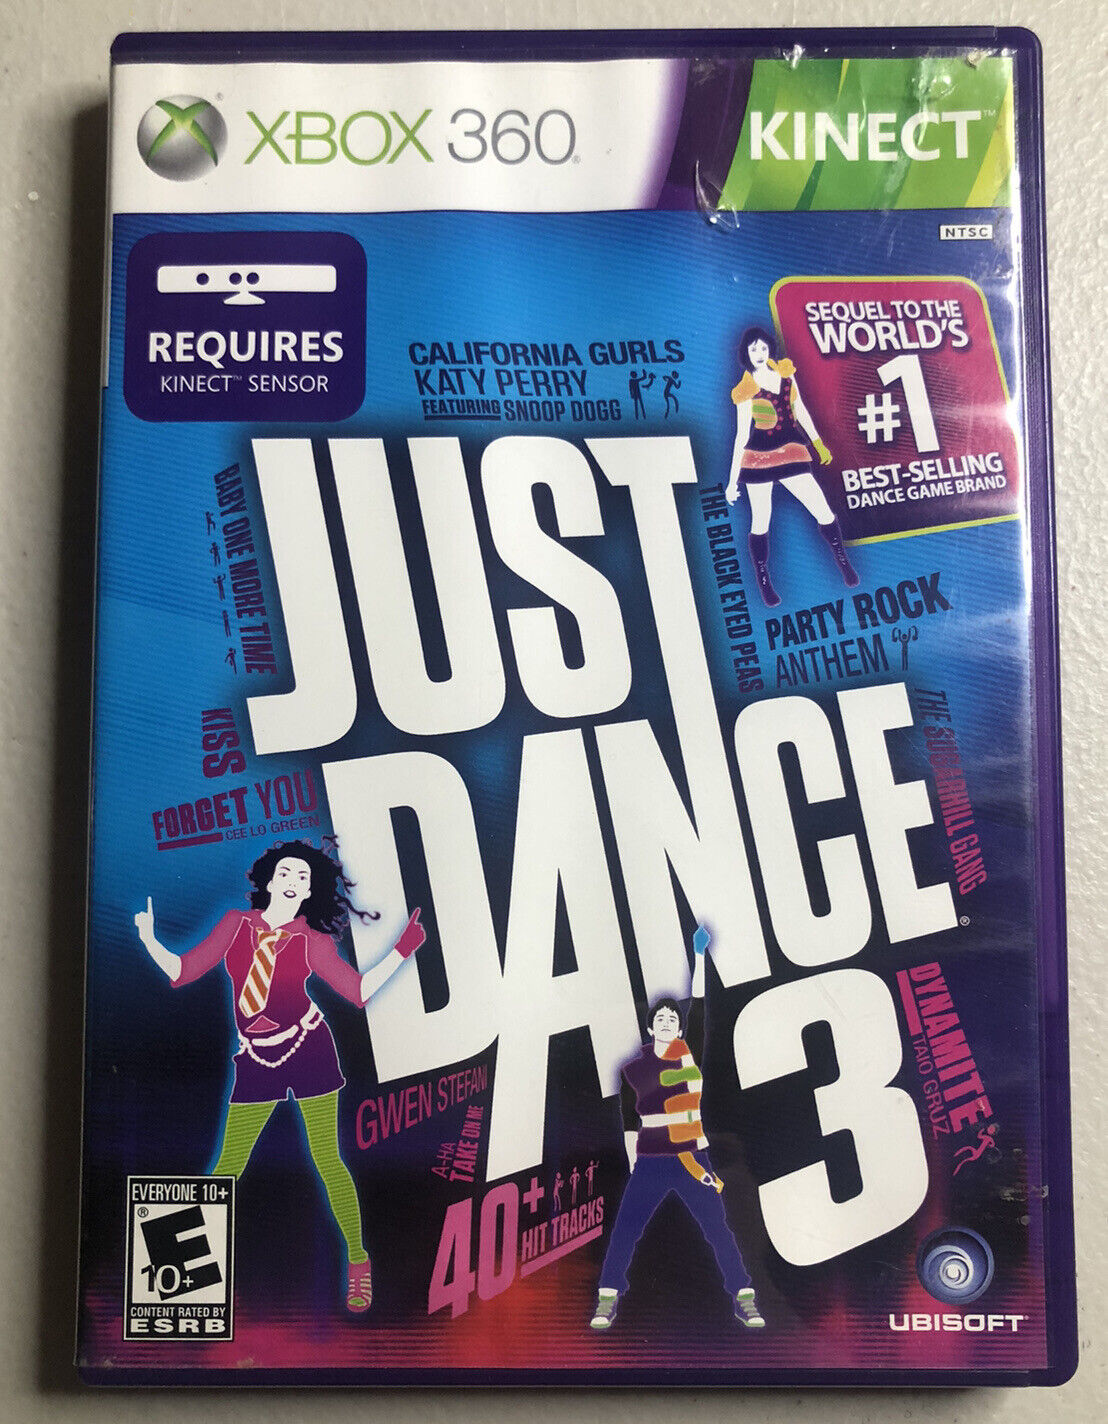 Uitwisseling thermometer Renaissance Just Dance 3 (Microsoft Xbox 360) Kinect Sensor Required - No Manual  8888526773 | eBay